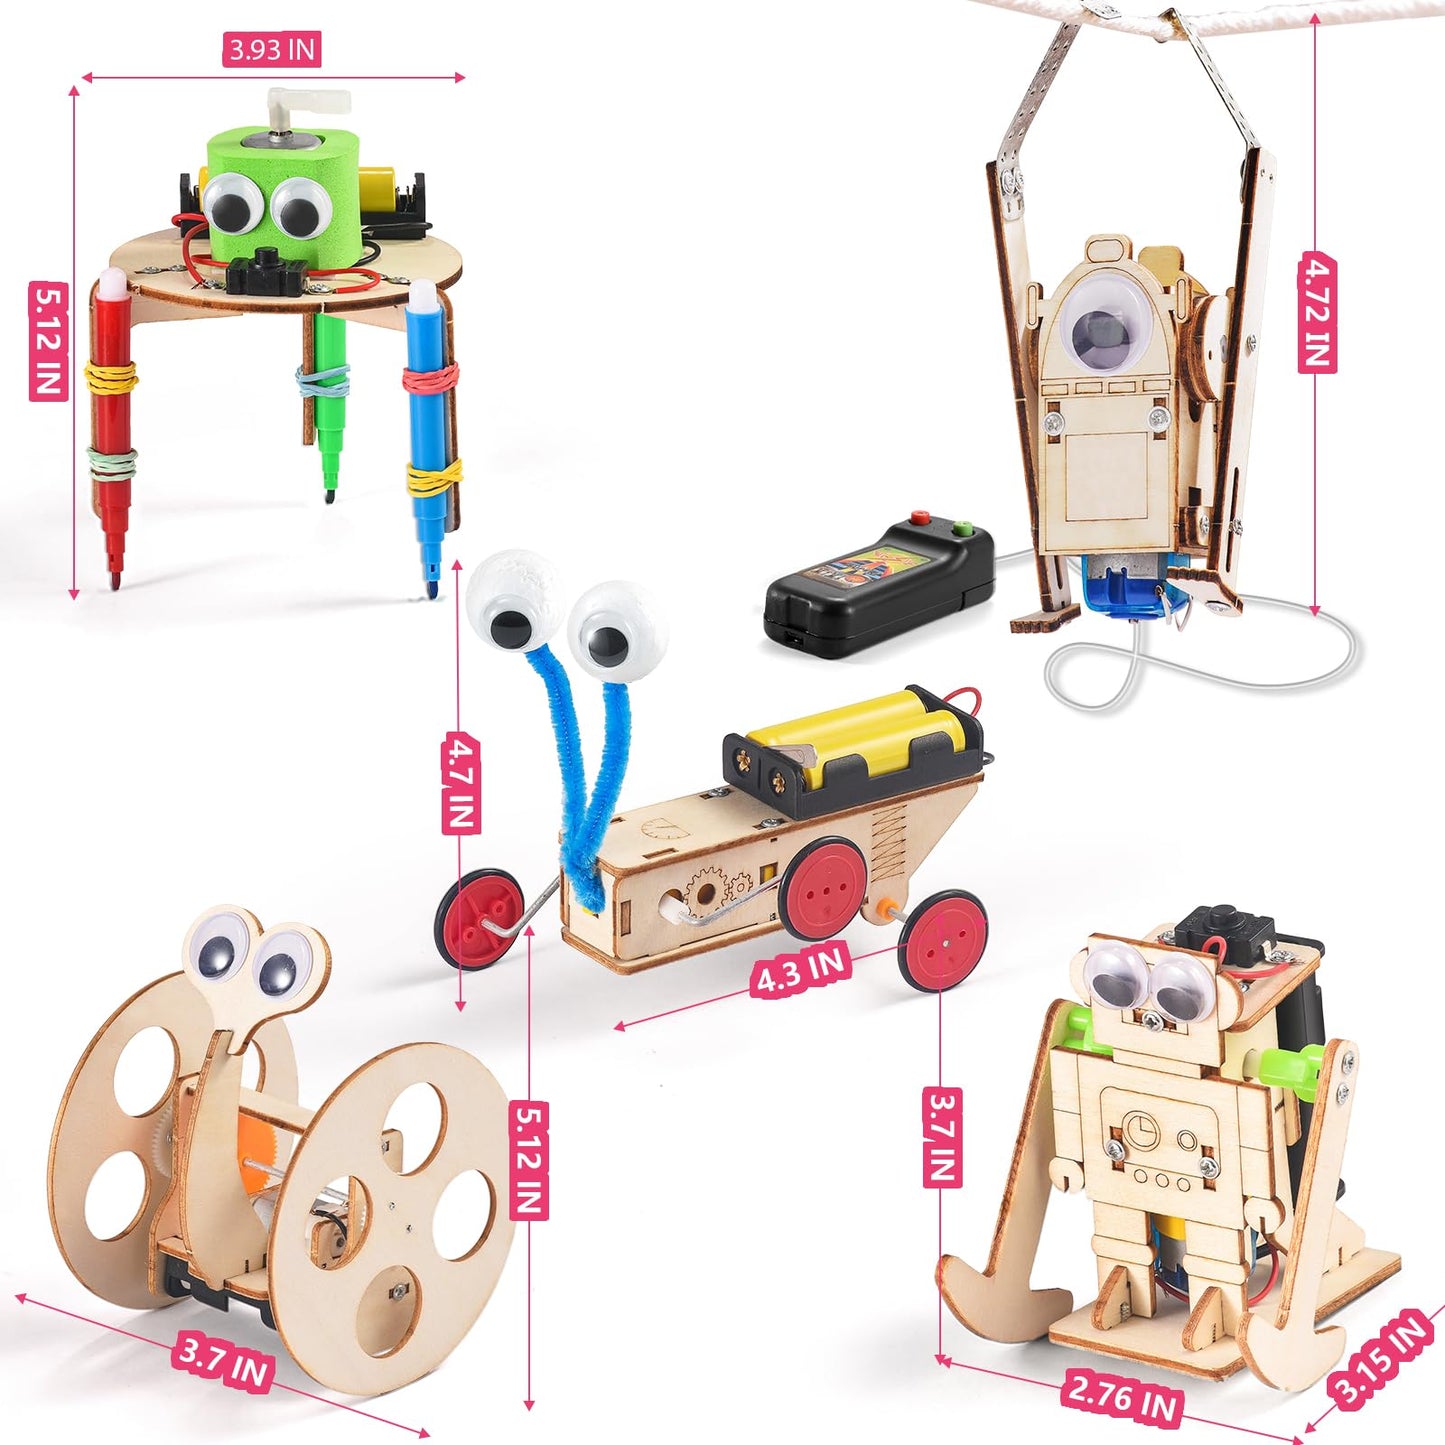 STEM Kits for Kids Ages 8-10-12, Robot Building Crafts Kit for Boys Age 6-8, Wood Science Projects, 3D Wooden Puzzles, Woodworking Model Christmas Toys for 5 6 7 8 9 10 11 12+